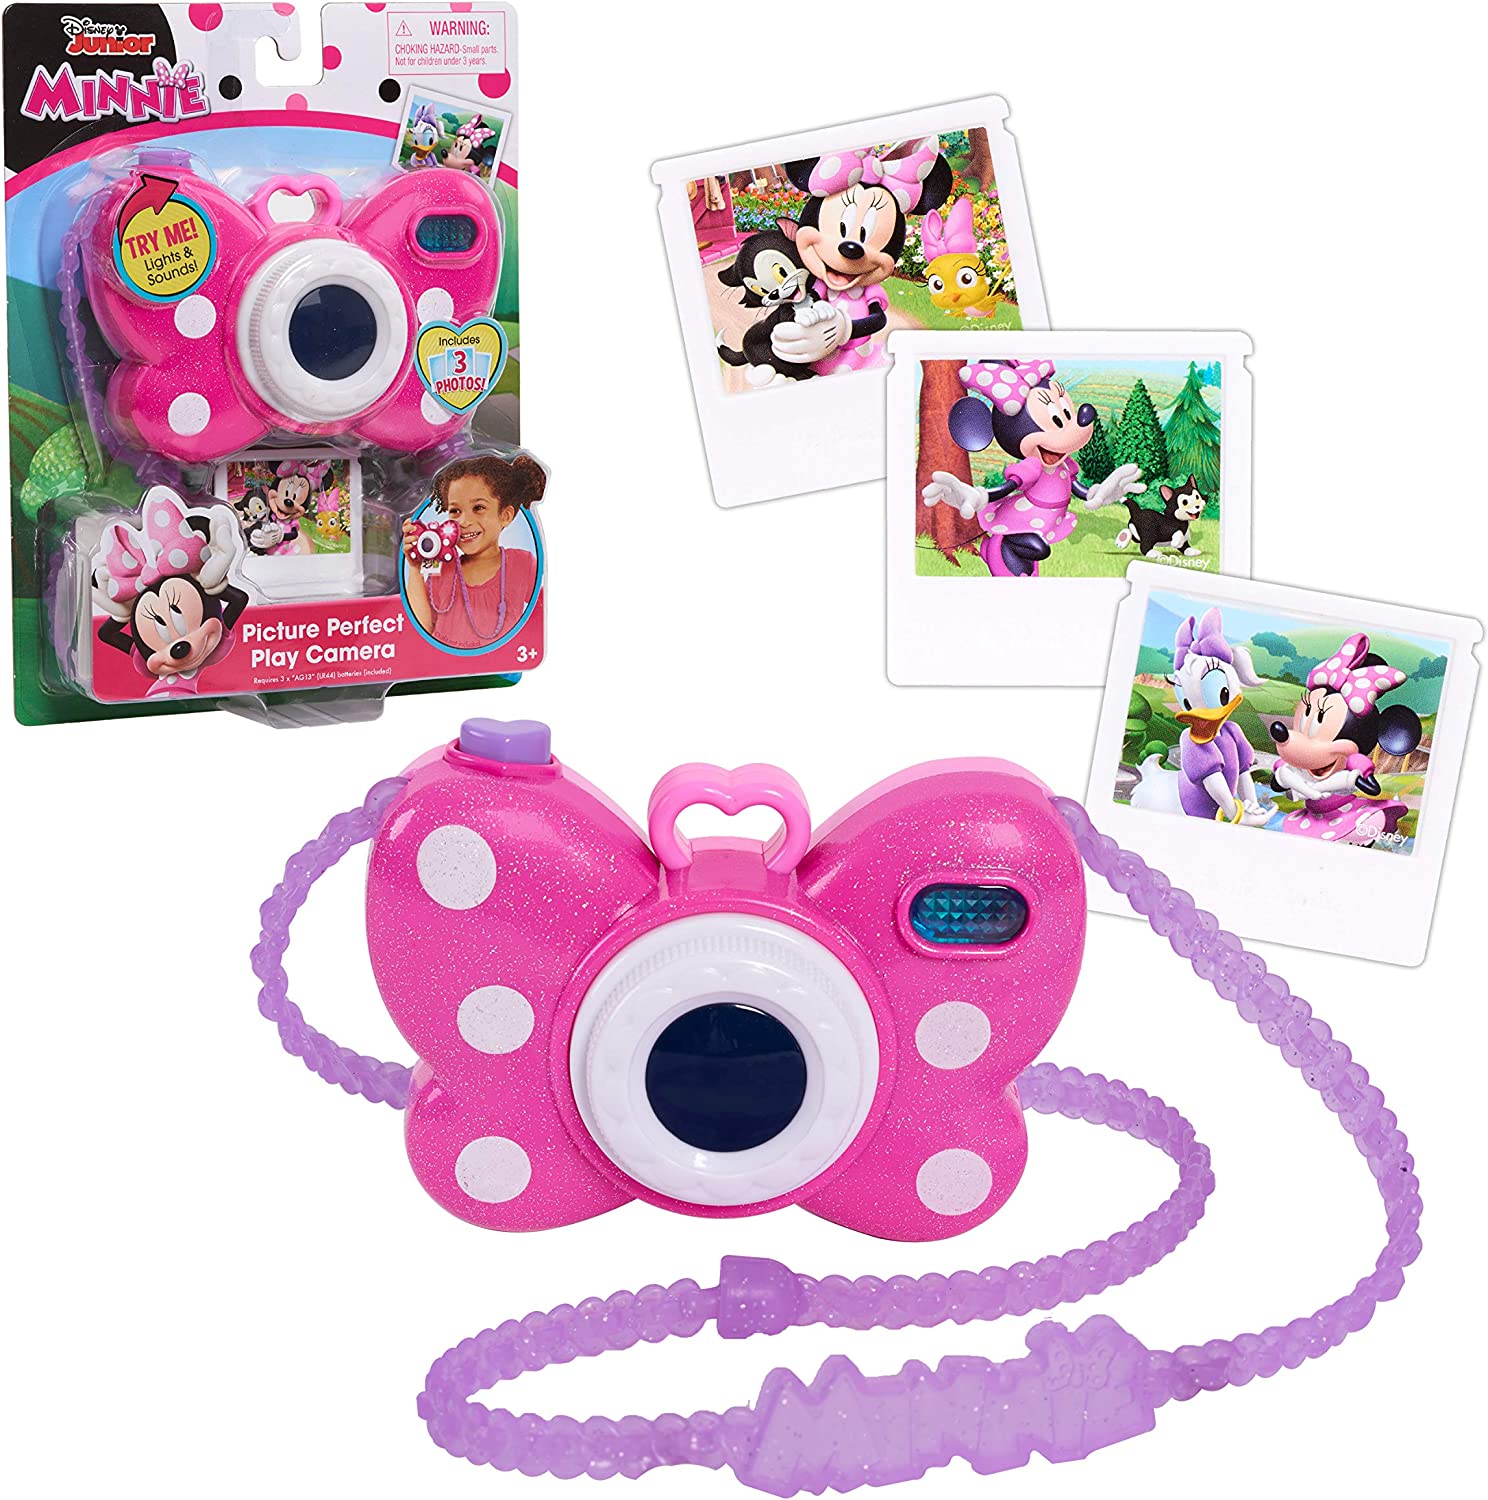 Minnie Mouse Picture Play Camera